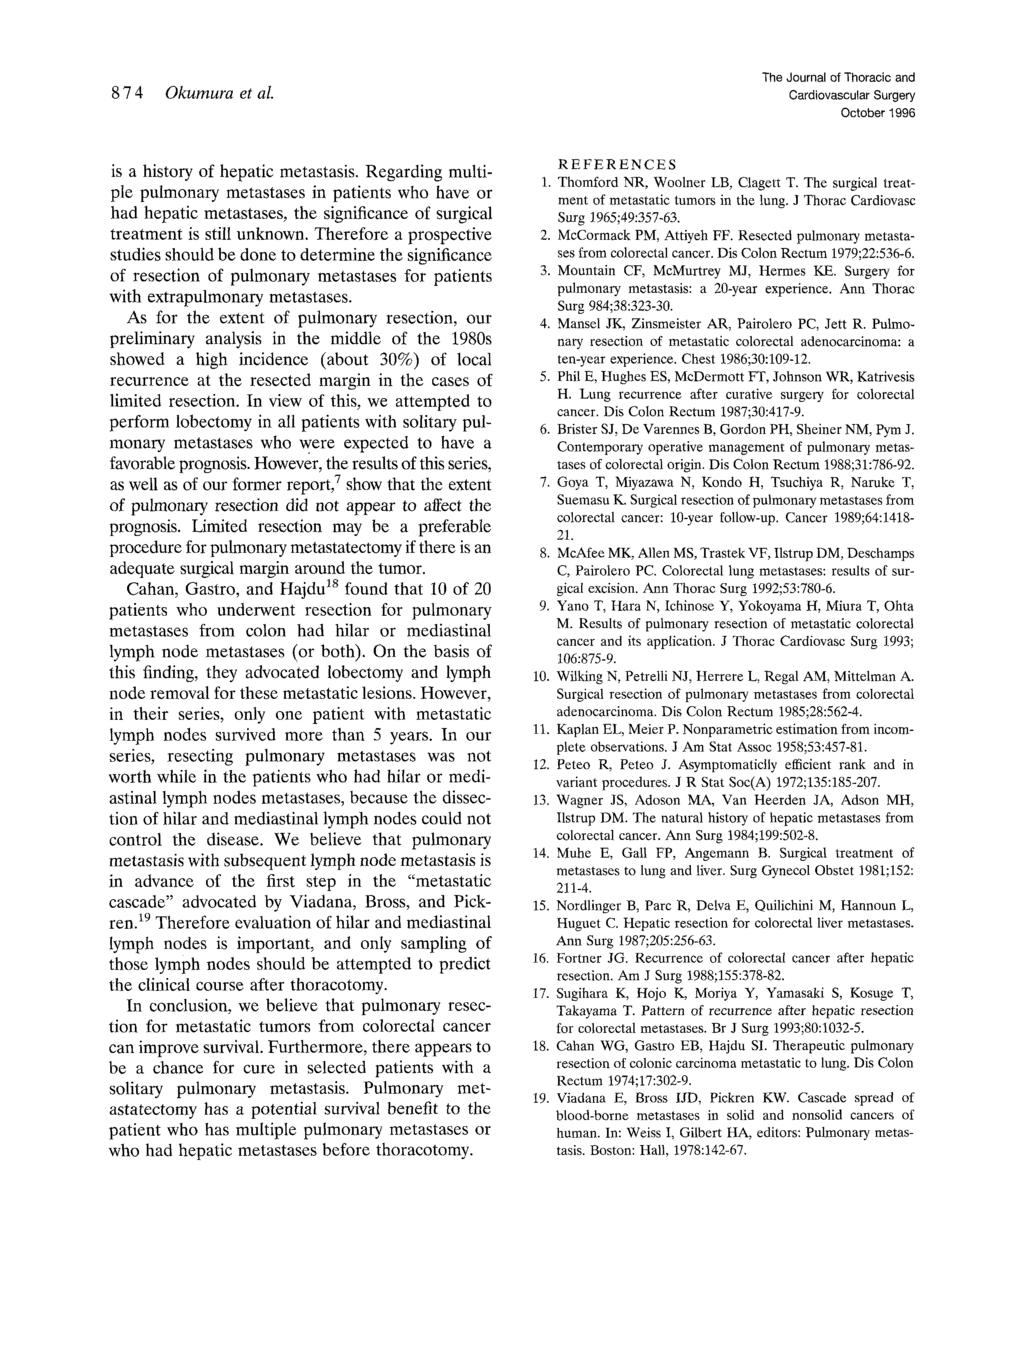 8 7 4 Okumura et al. The Journal of Thoracic and October 1996 is a history of hepatic metastasis.